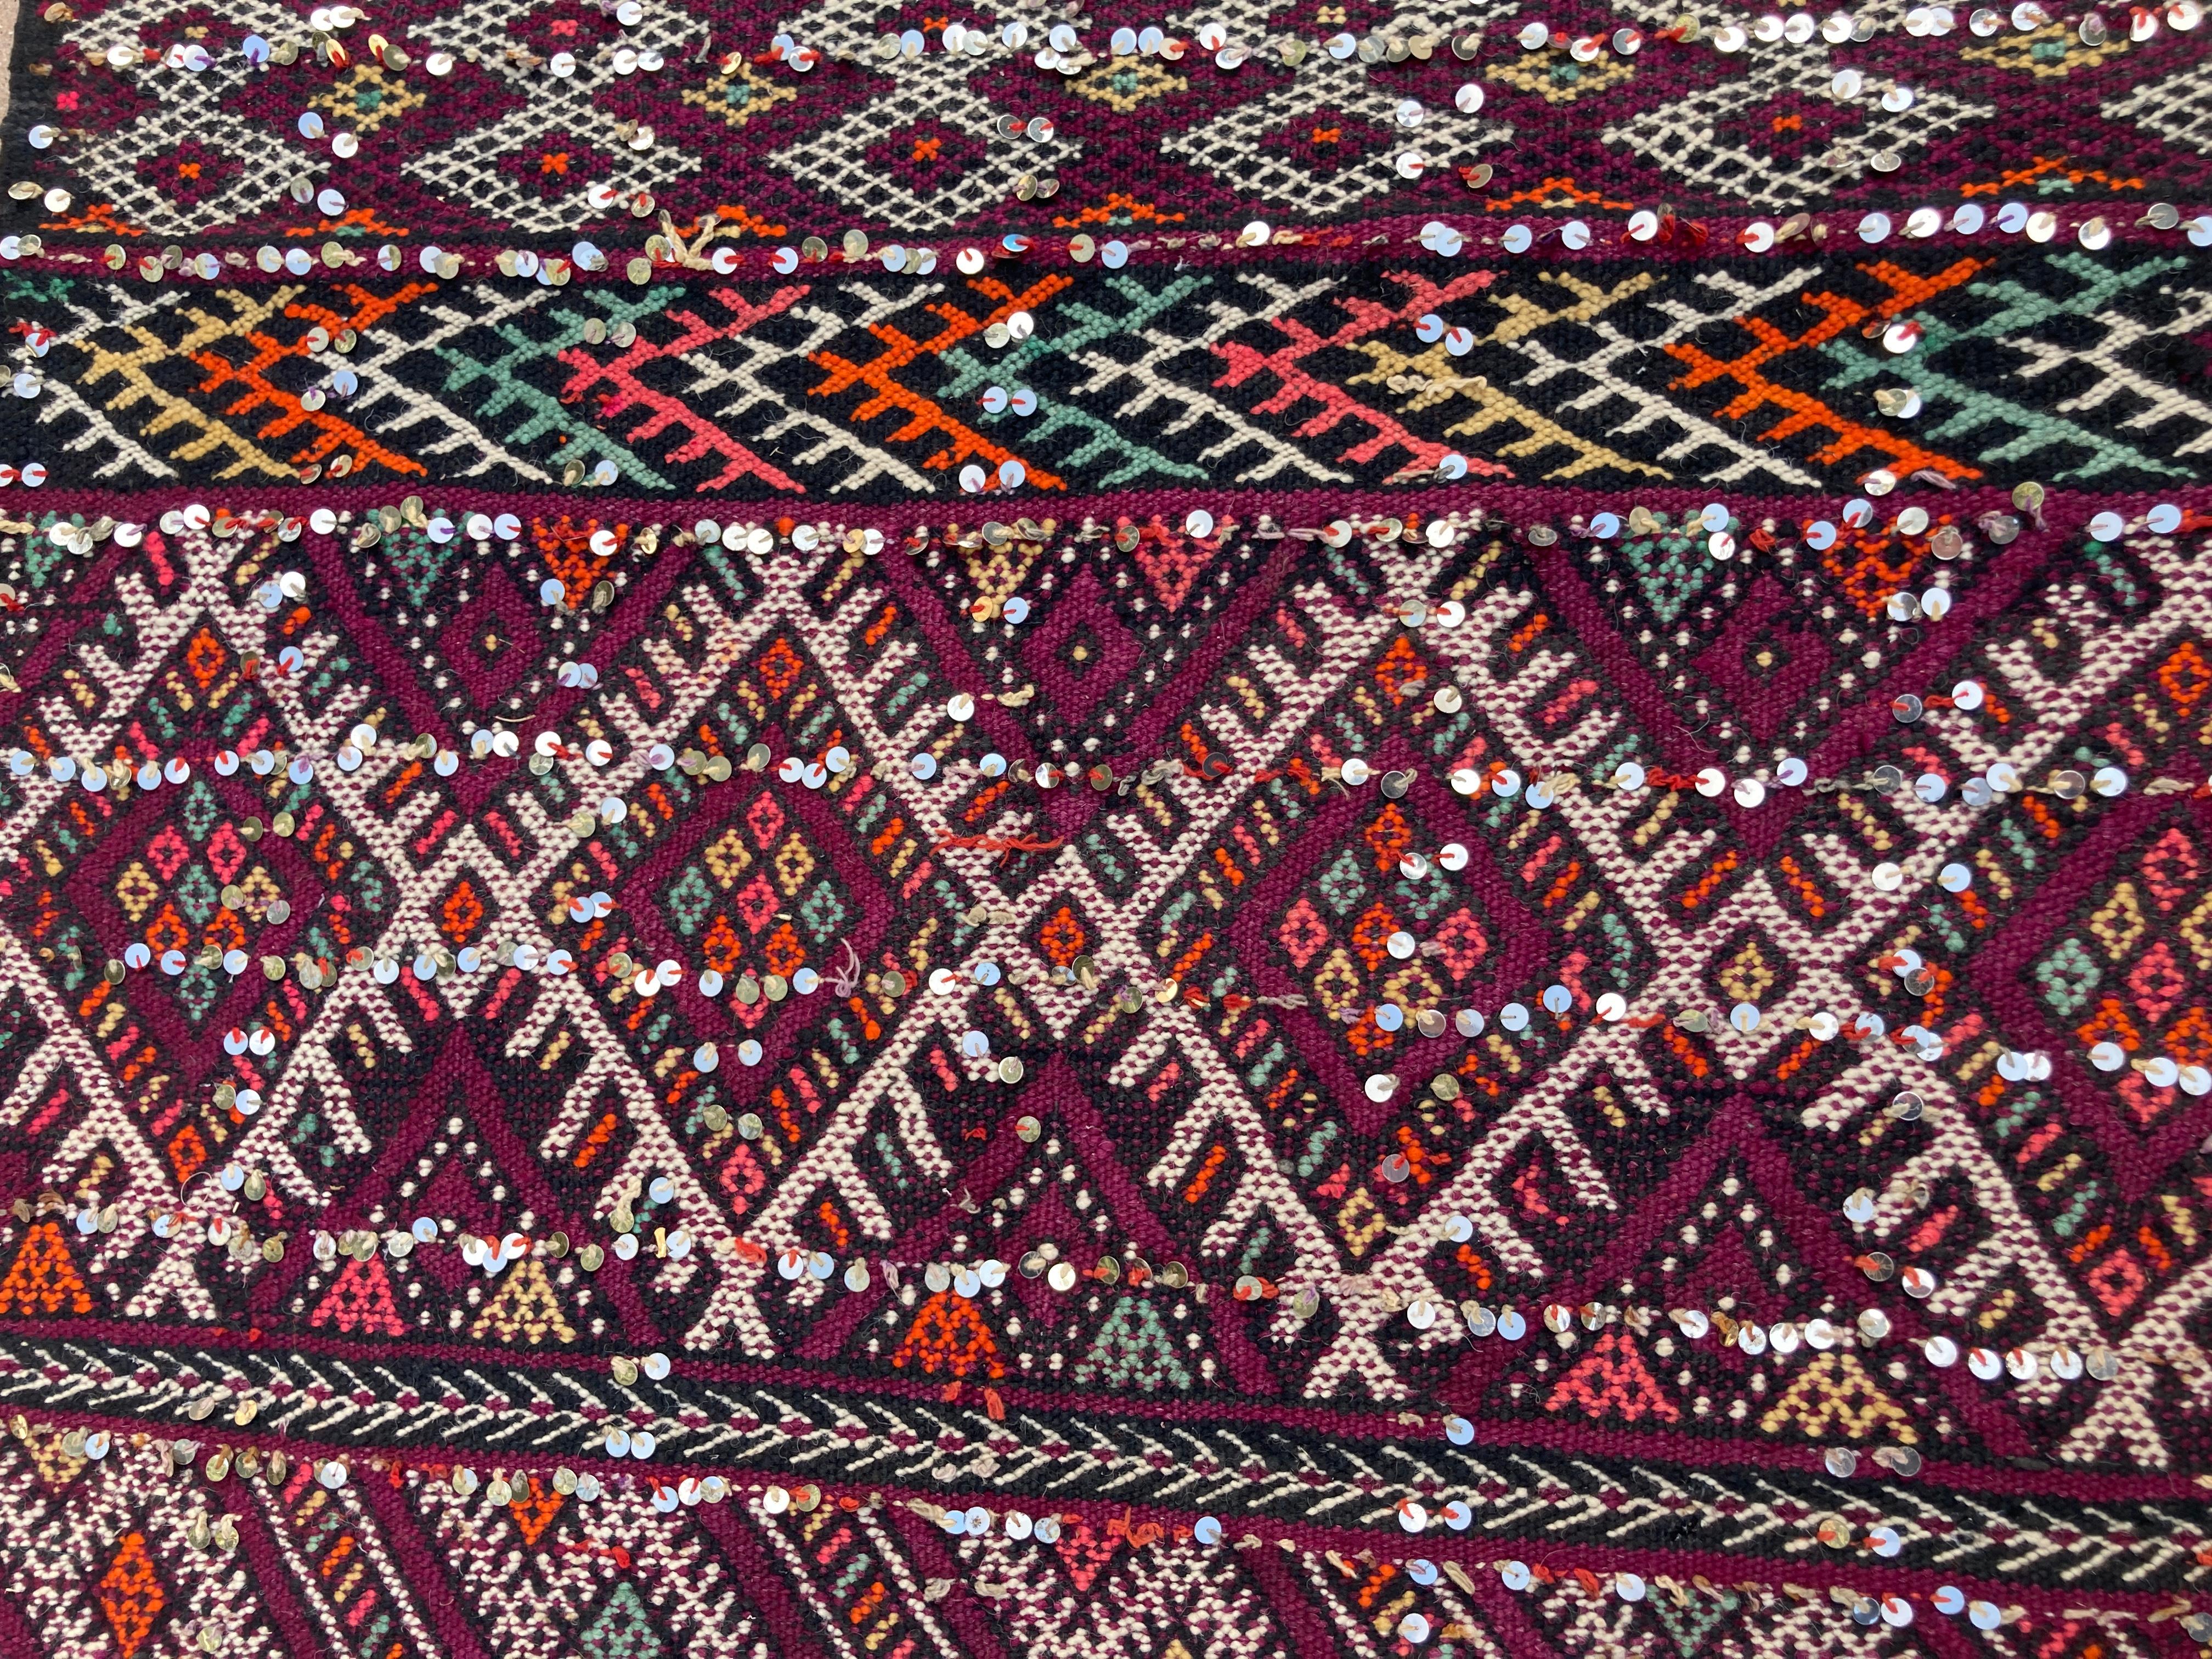 Hand-Woven 1940s Moroccan Tribal Rug African Ethnic Textile Floor Covering For Sale